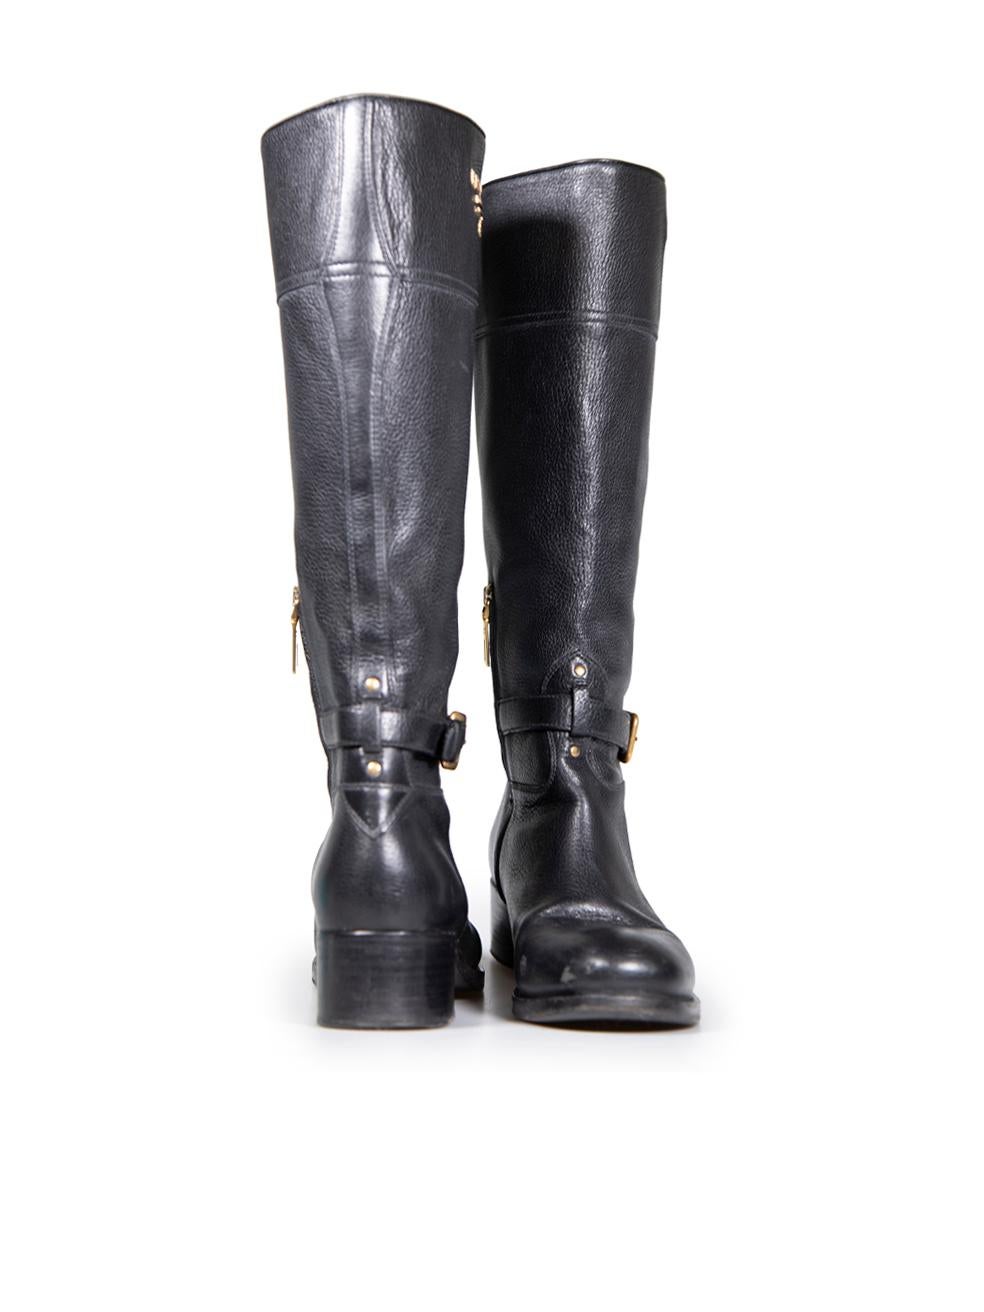 Prada Black Calf Leather Logo Knee High Boots Size IT 39 In Good Condition For Sale In London, GB